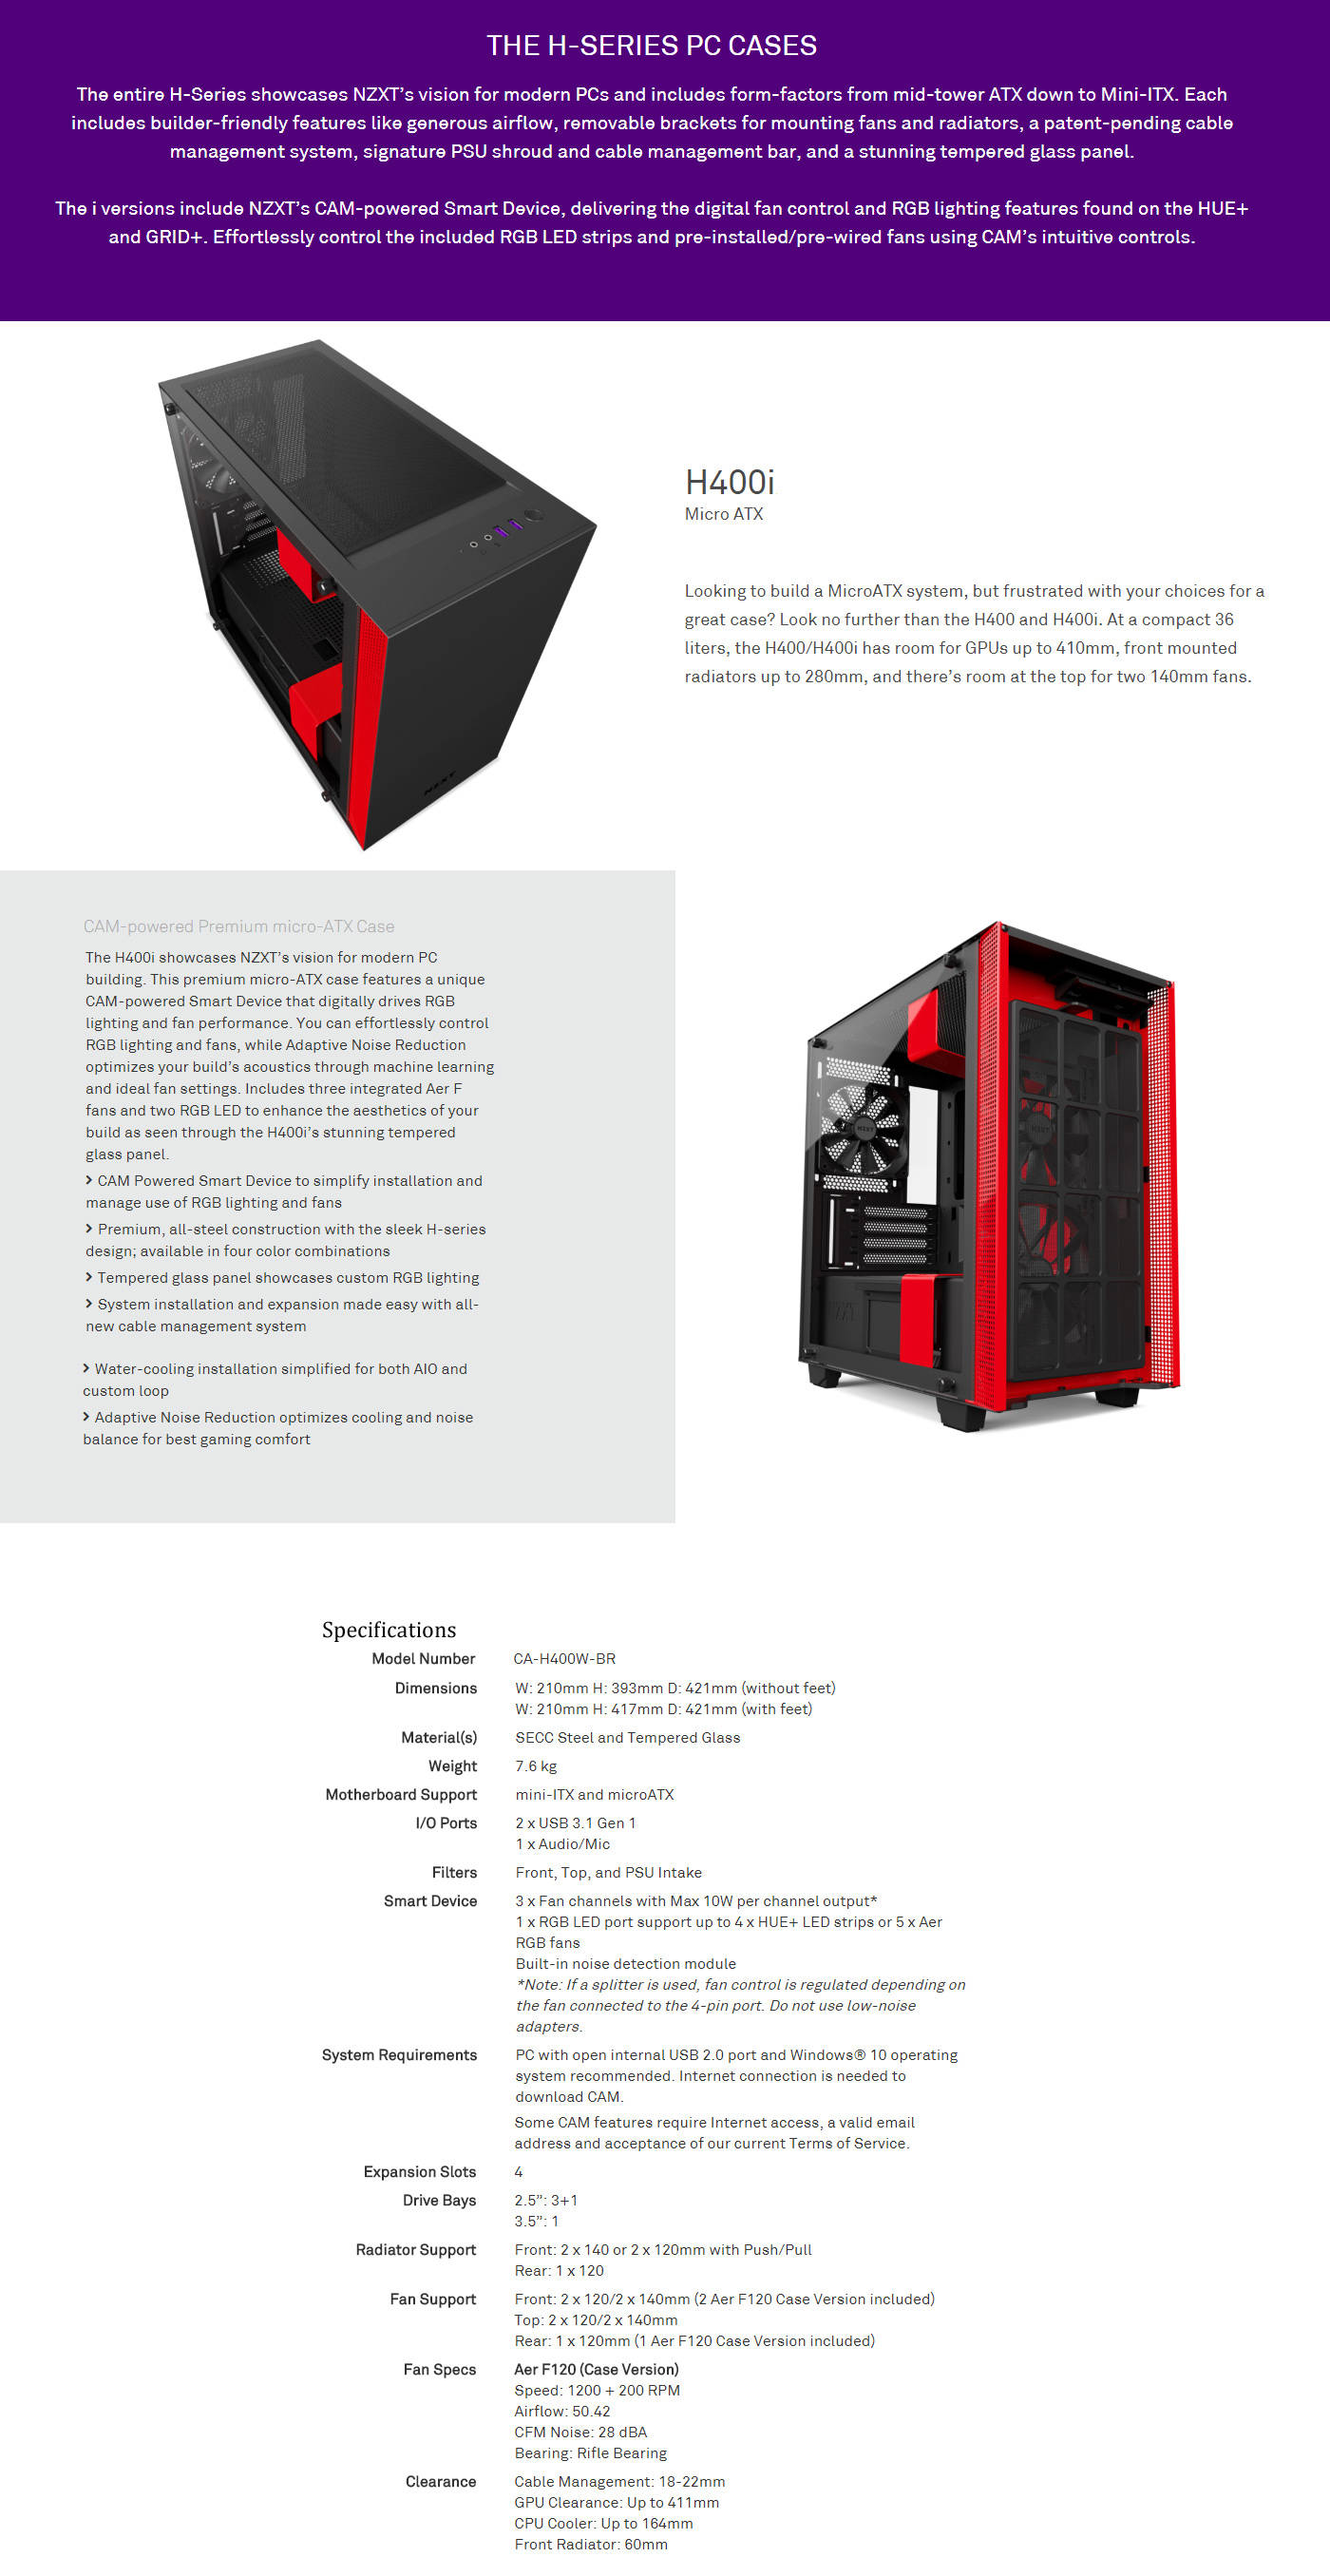  Buy Online Nzxt H400i Premium Micro-ATX Case with CAM - Matte Black + Red (CA-H400W-BR)